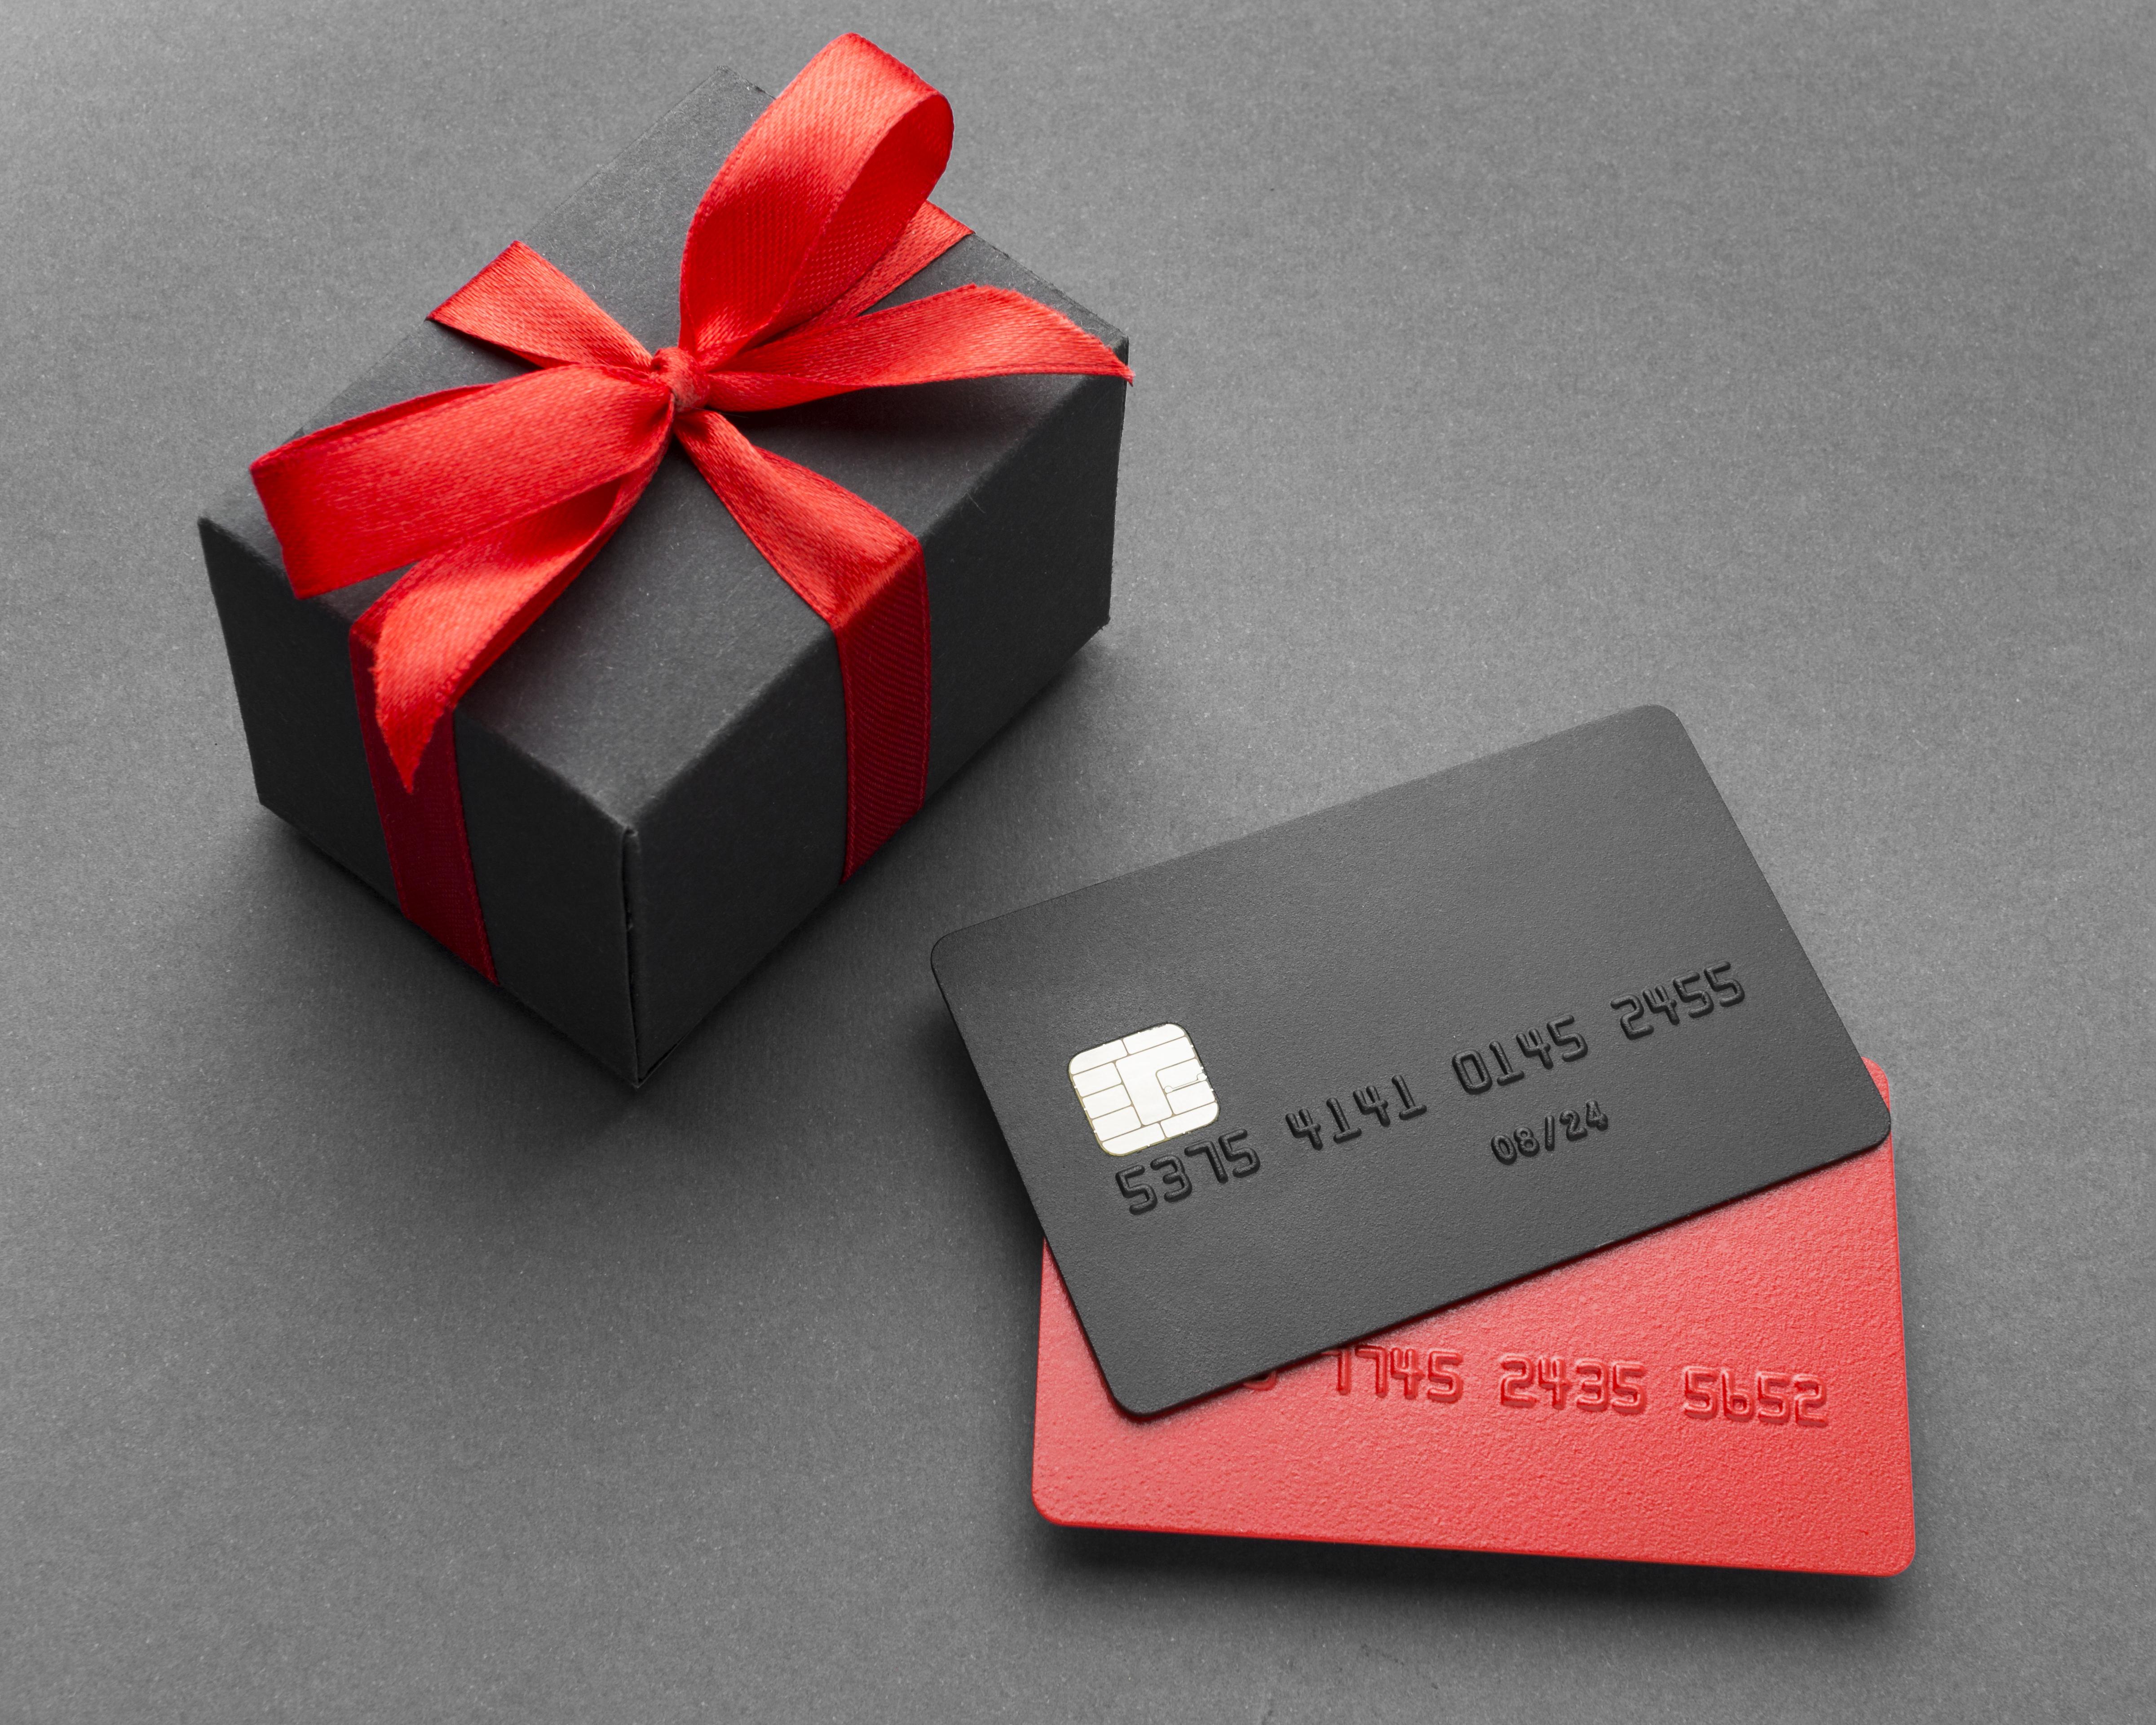 nth Card proposes new gift card sales opportunities for mid-size merchants